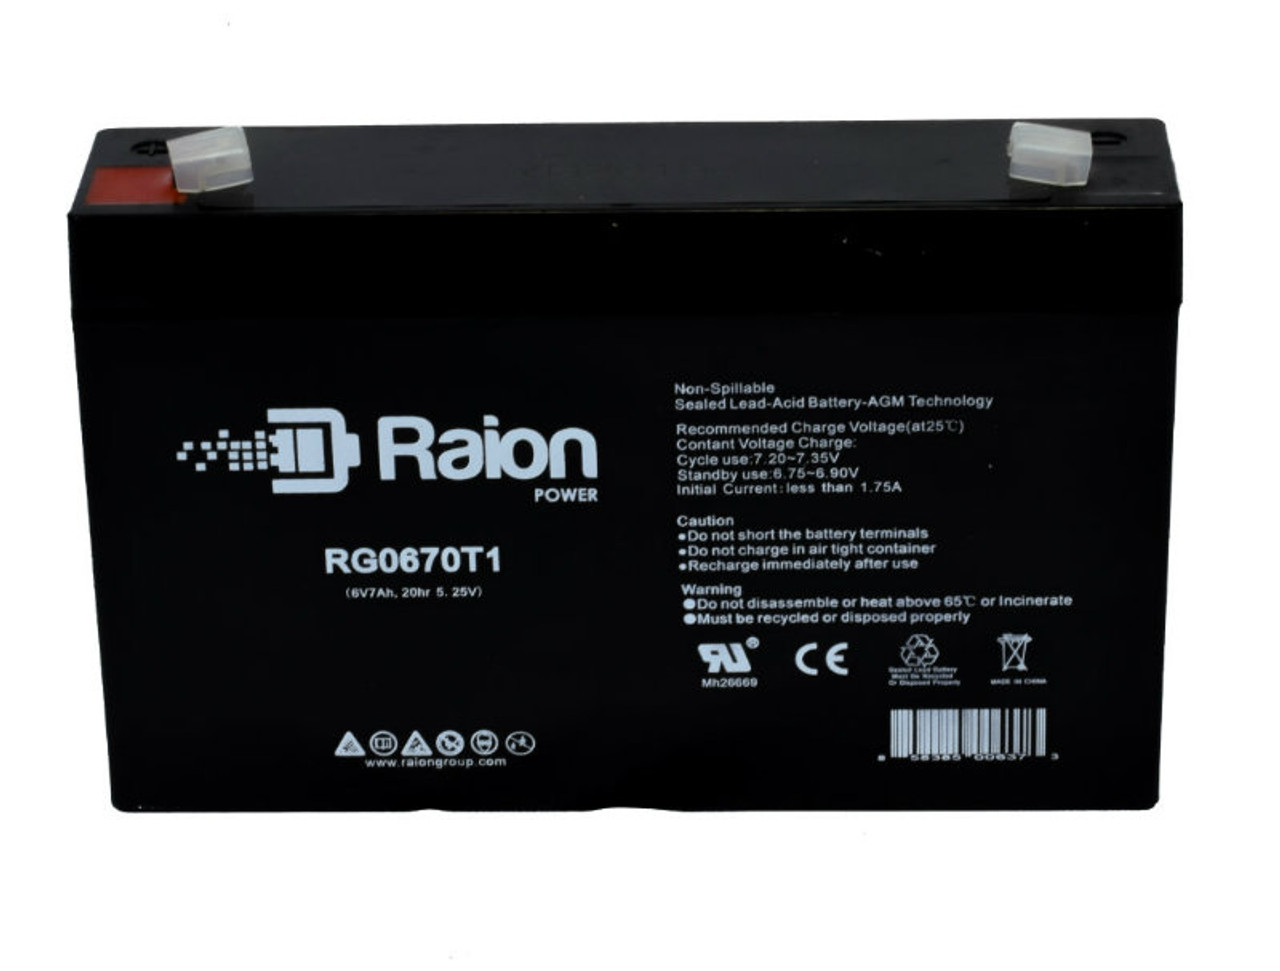 Raion Power RG0670T1 Replacement Battery Cartridge for Pace Tech Oximax 100 Pulse Oximeter